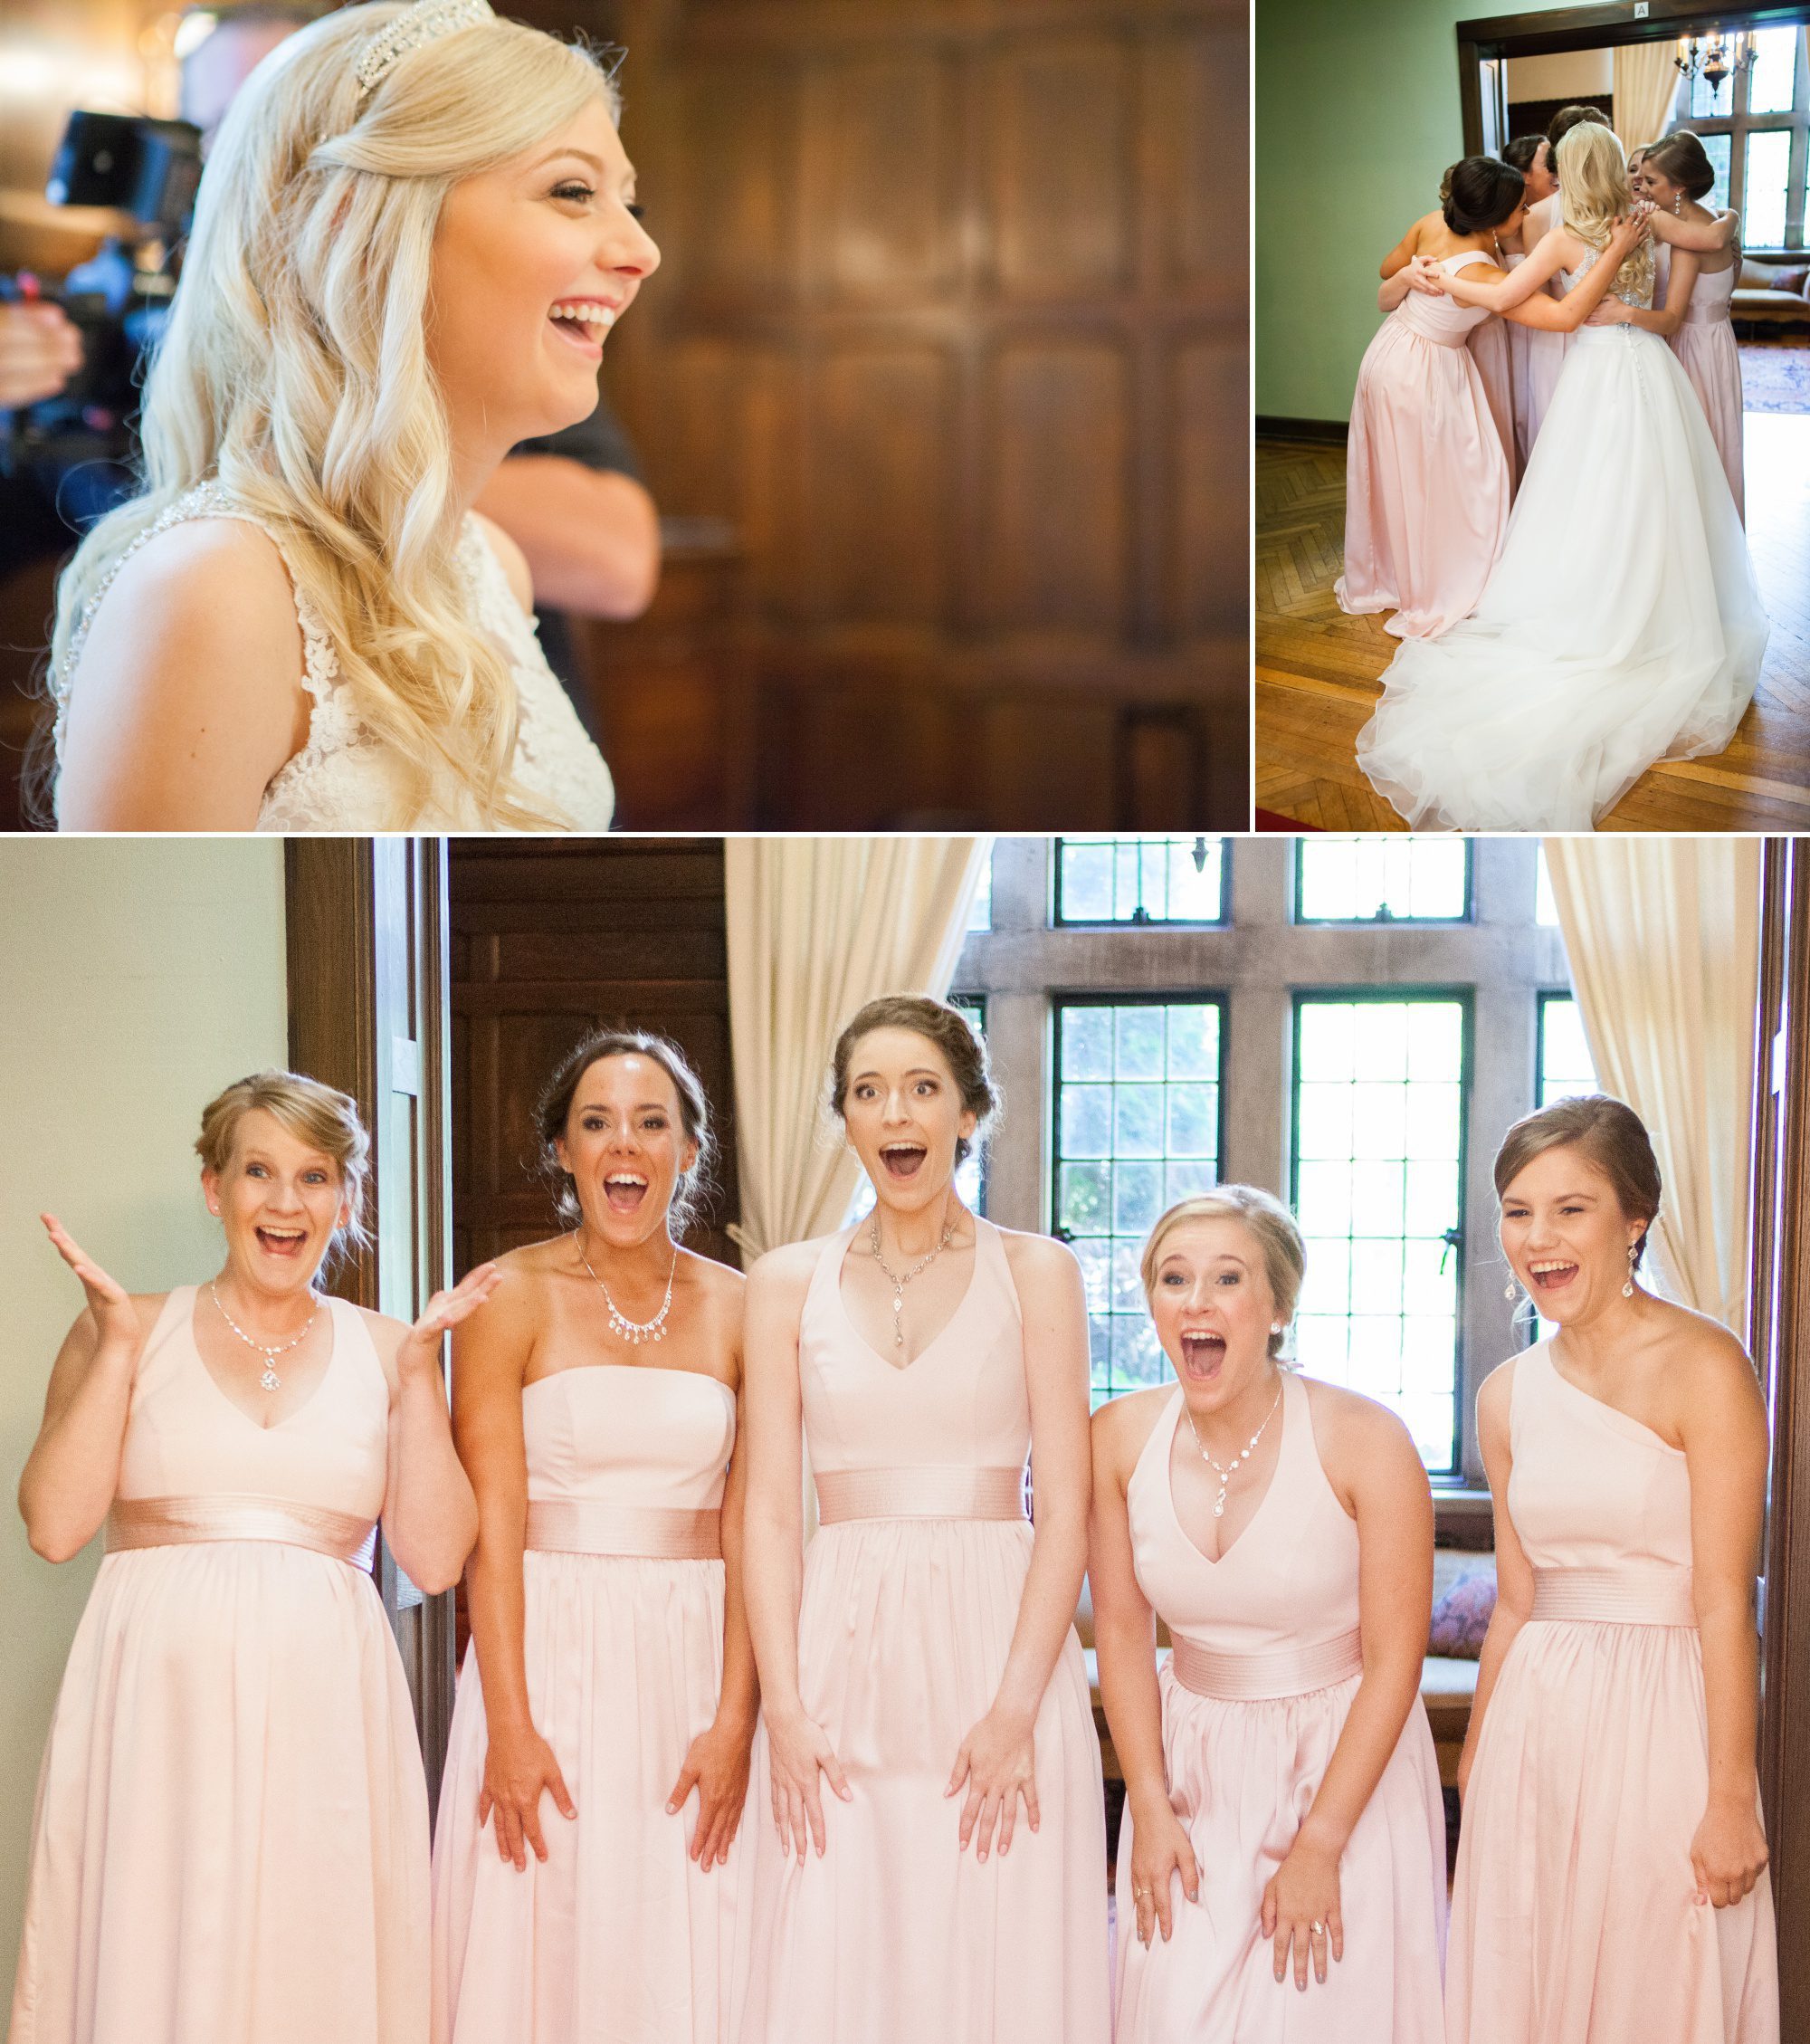 First look with bridesmaids - Wightman Chapel at Scarritt Bennett before summer wedding ceremony in Nashville, TN. Photography by Krista Lee Photography.